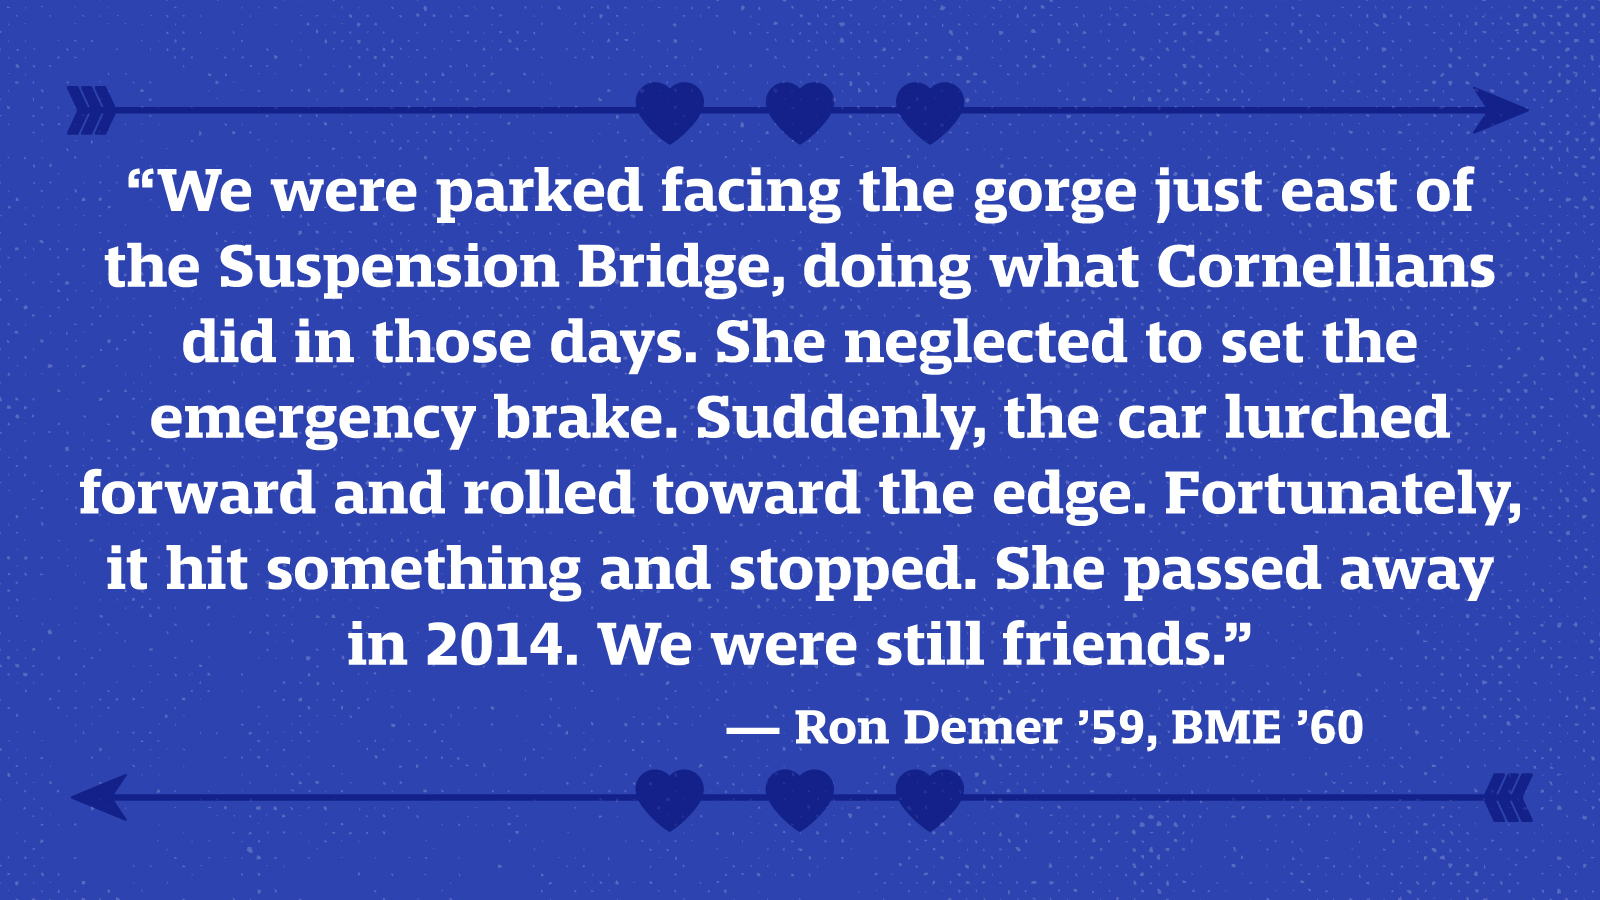 “We were parked facing the gorge just east of the Suspension Bridge, doing what Cornellians did in those days. She neglected to set the emergency brake. Suddenly, the car lurched forward and rolled toward the edge. Fortunately, it hit something and stopped. She passed away in 2014. We were still friends.” — Ron Demer ’59, BME ’60